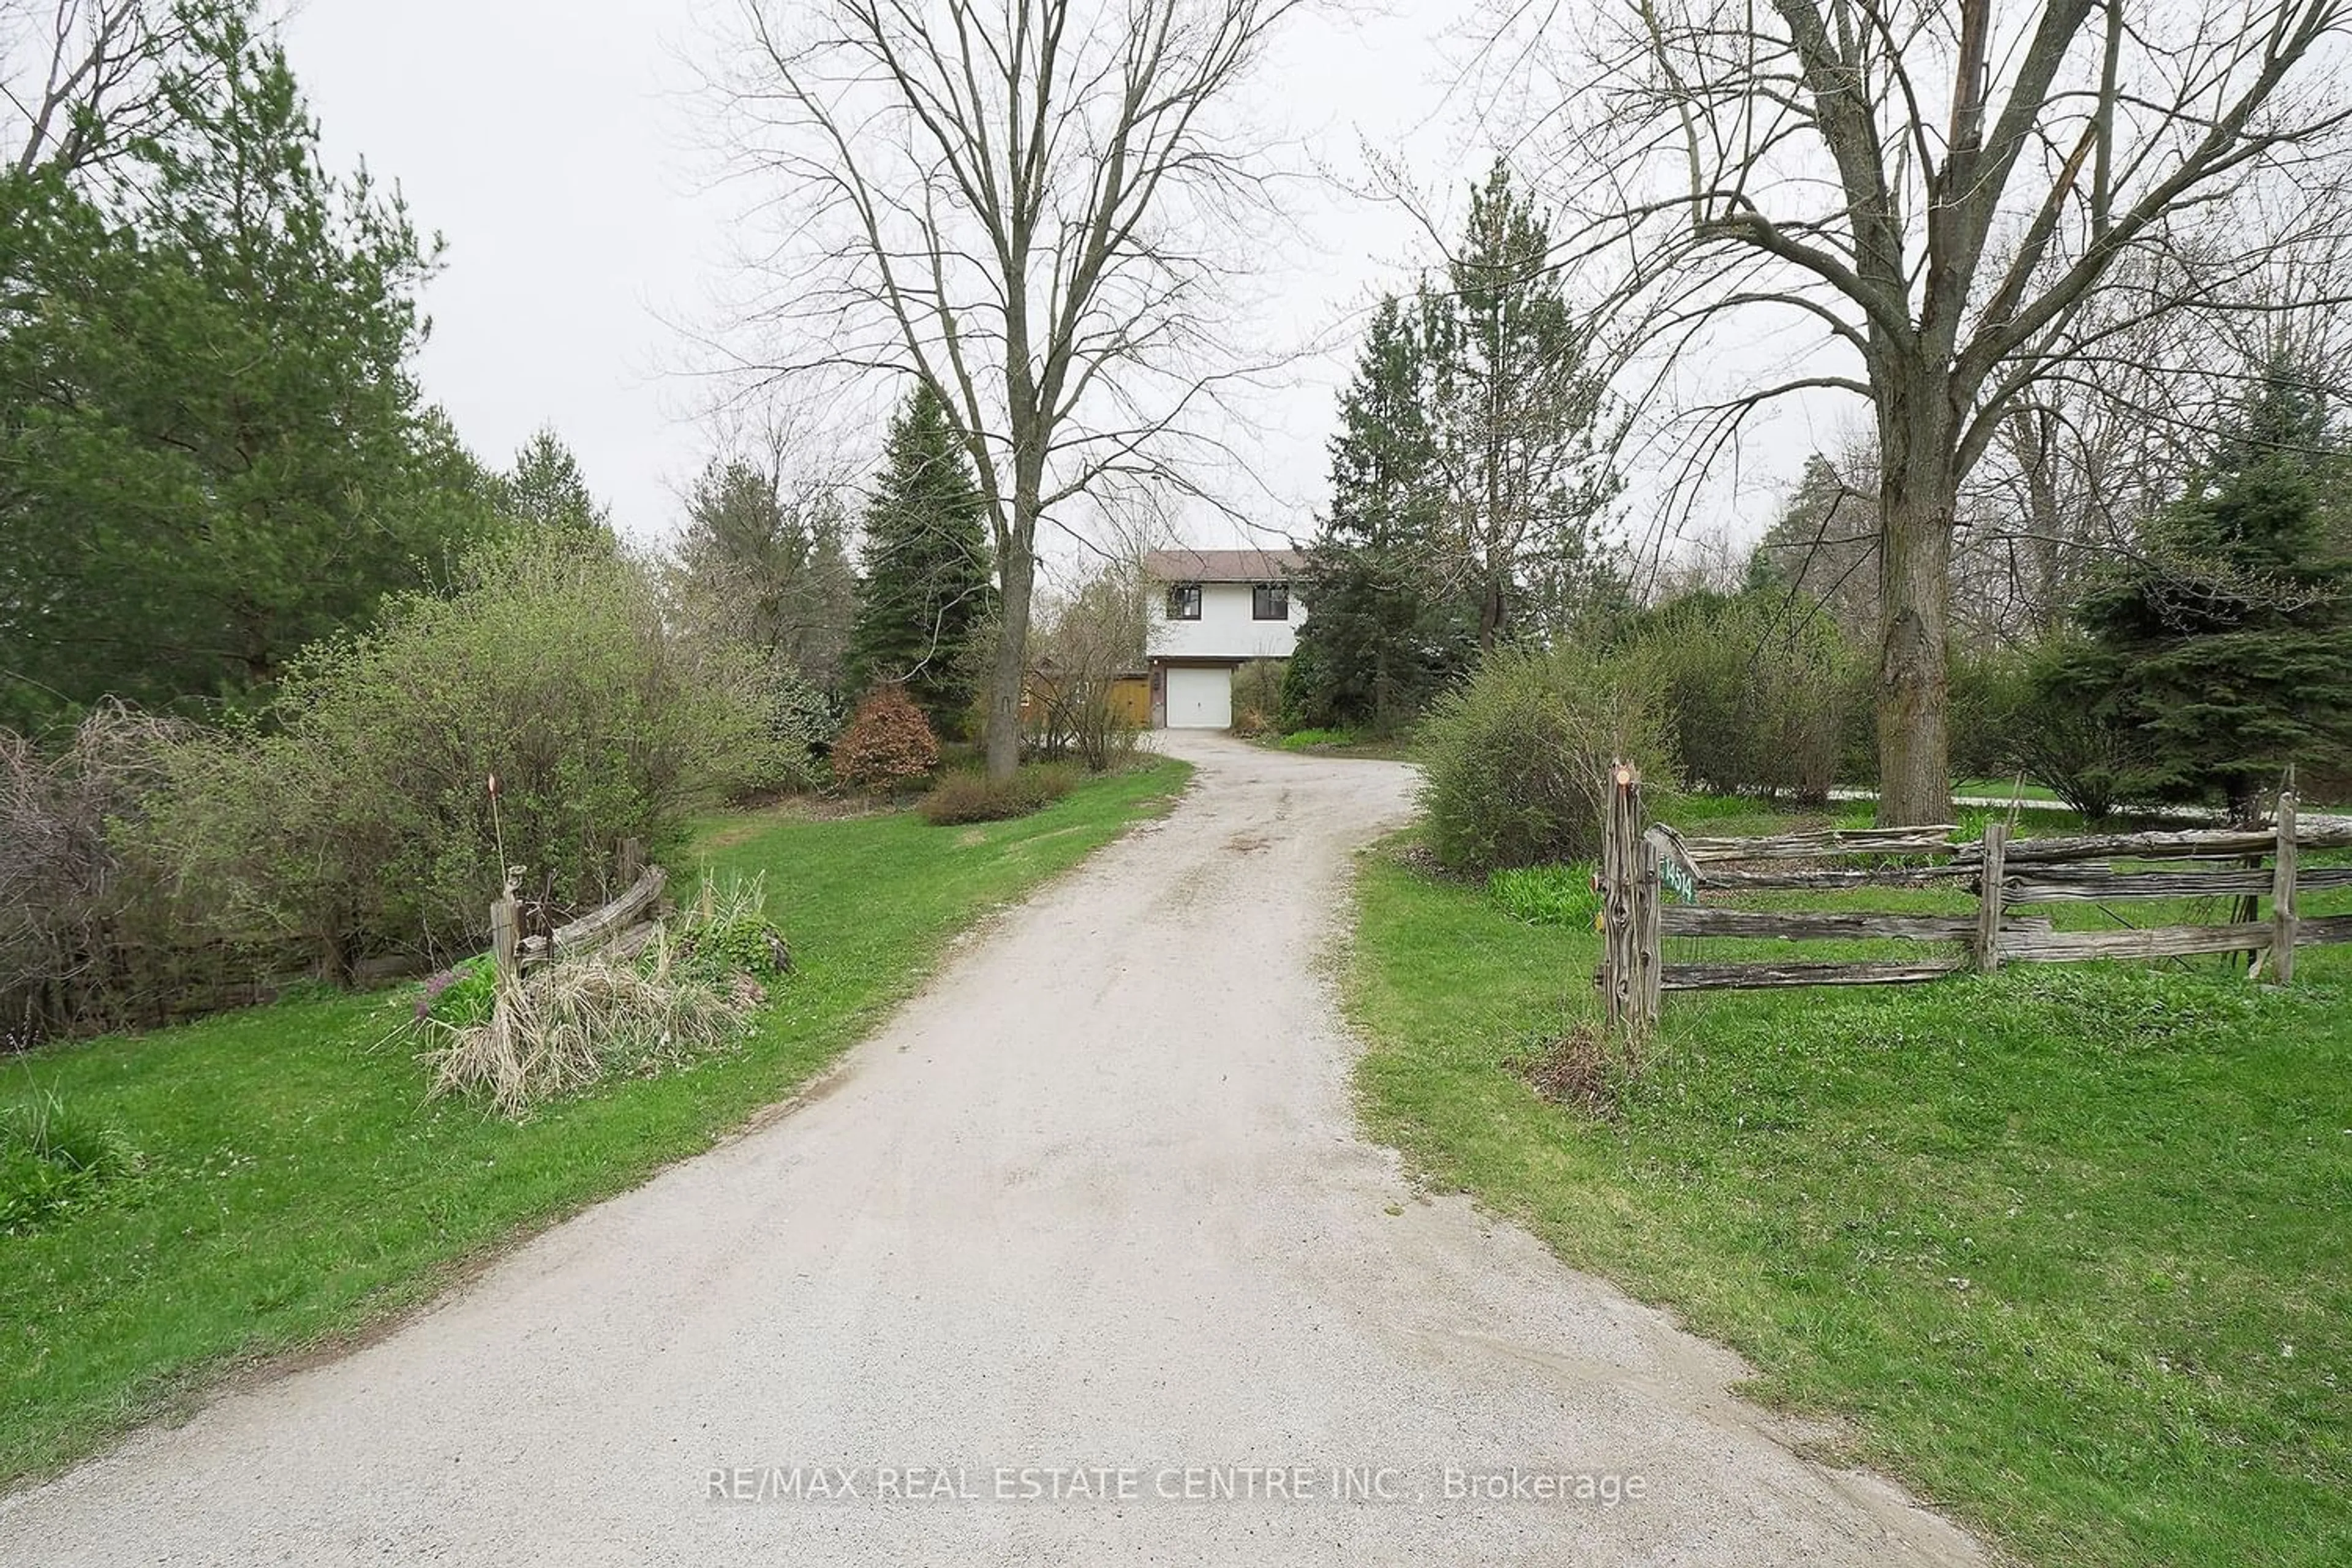 Street view for 14514 Side Road 32, Halton Hills Ontario L7G 4S8